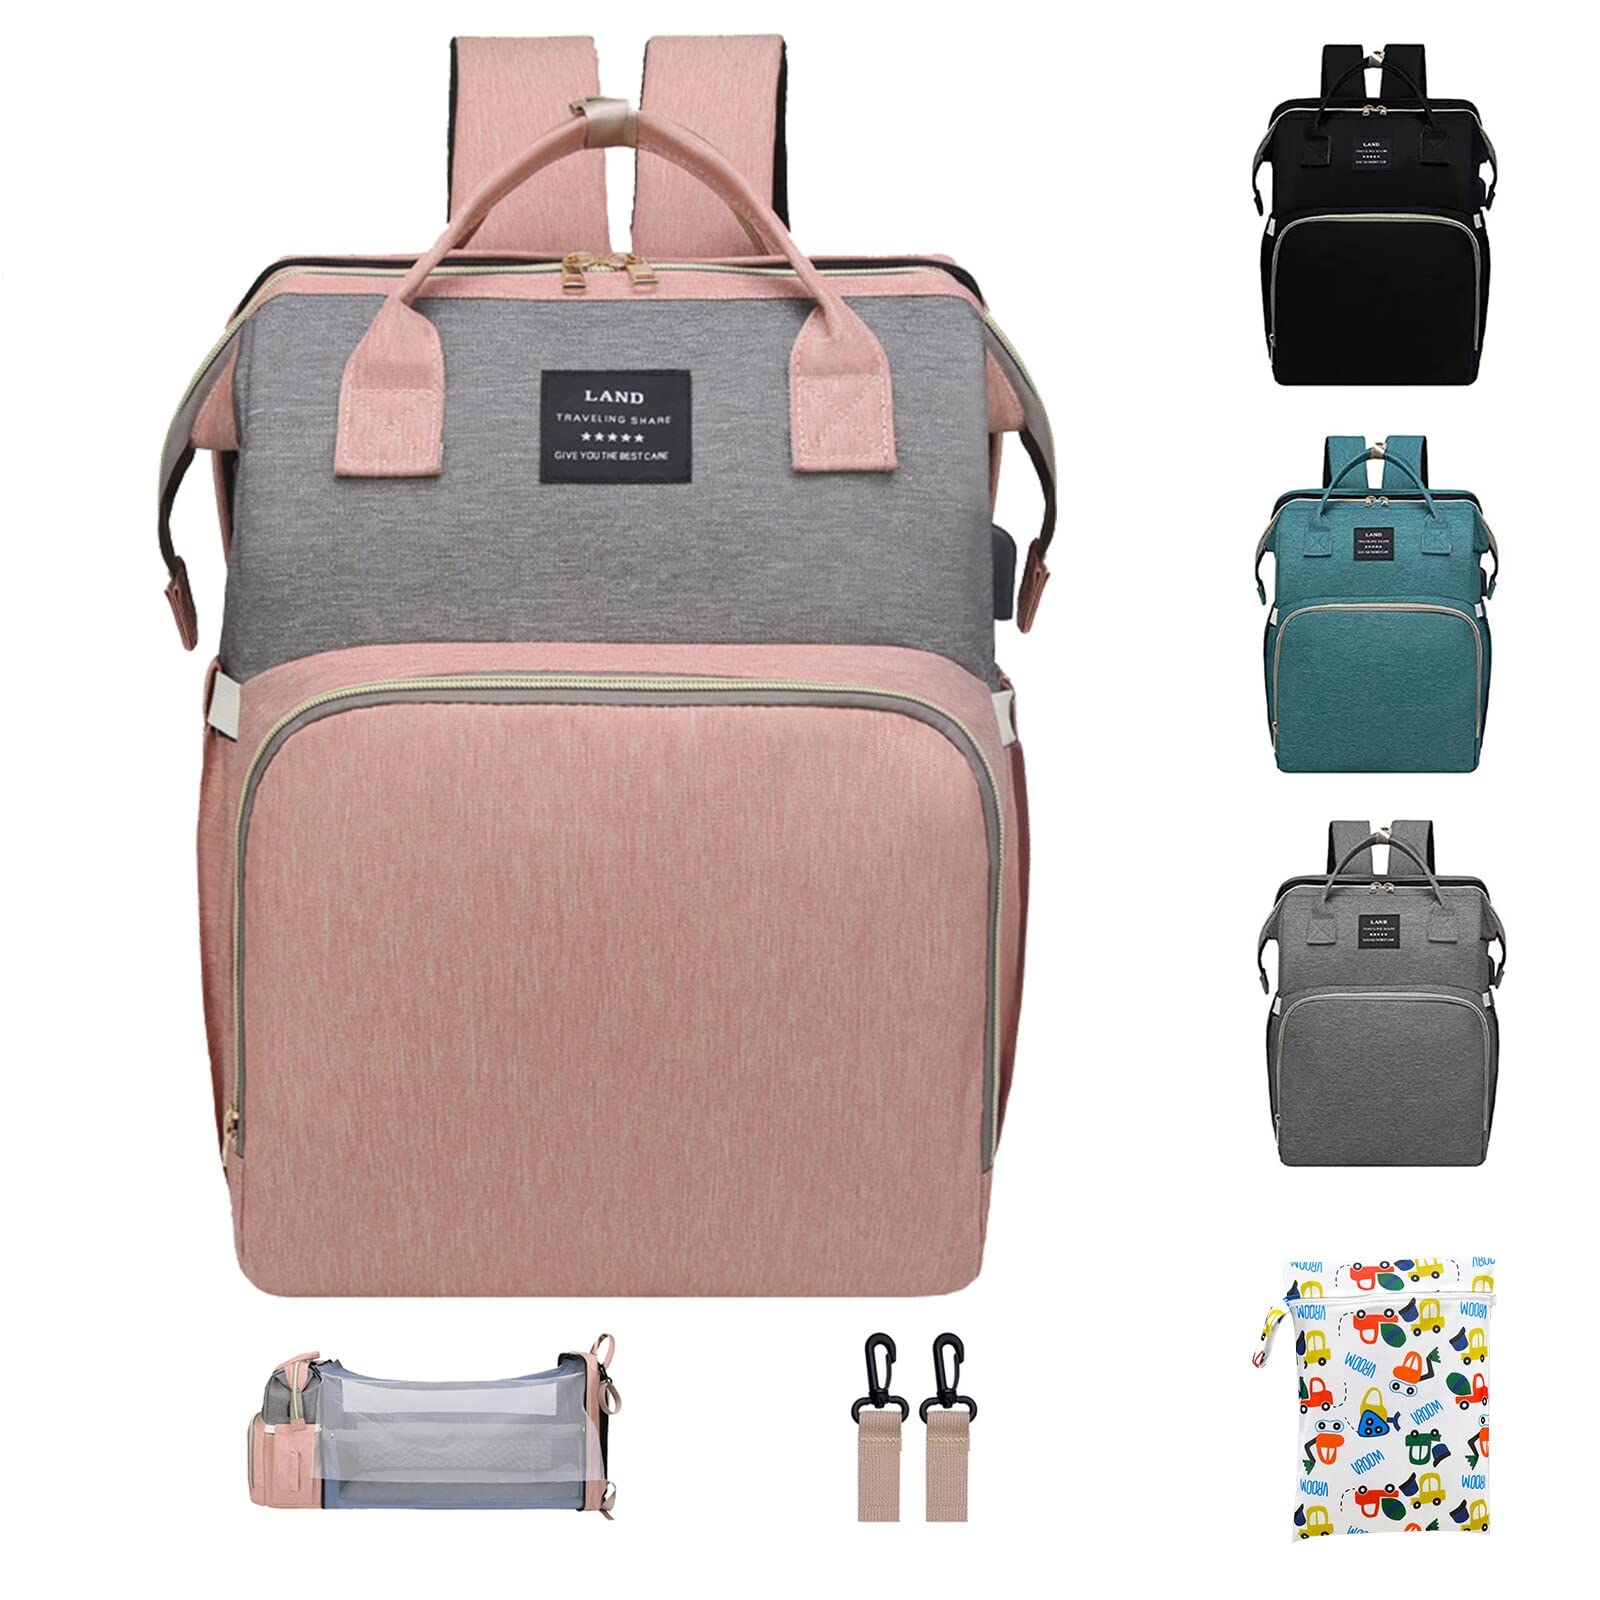 ANWTOTU Diaper Bag Backpack,7 in 1 Travel Diaper Bag,Mommy Bag With USB charging Port (Pink-grey)